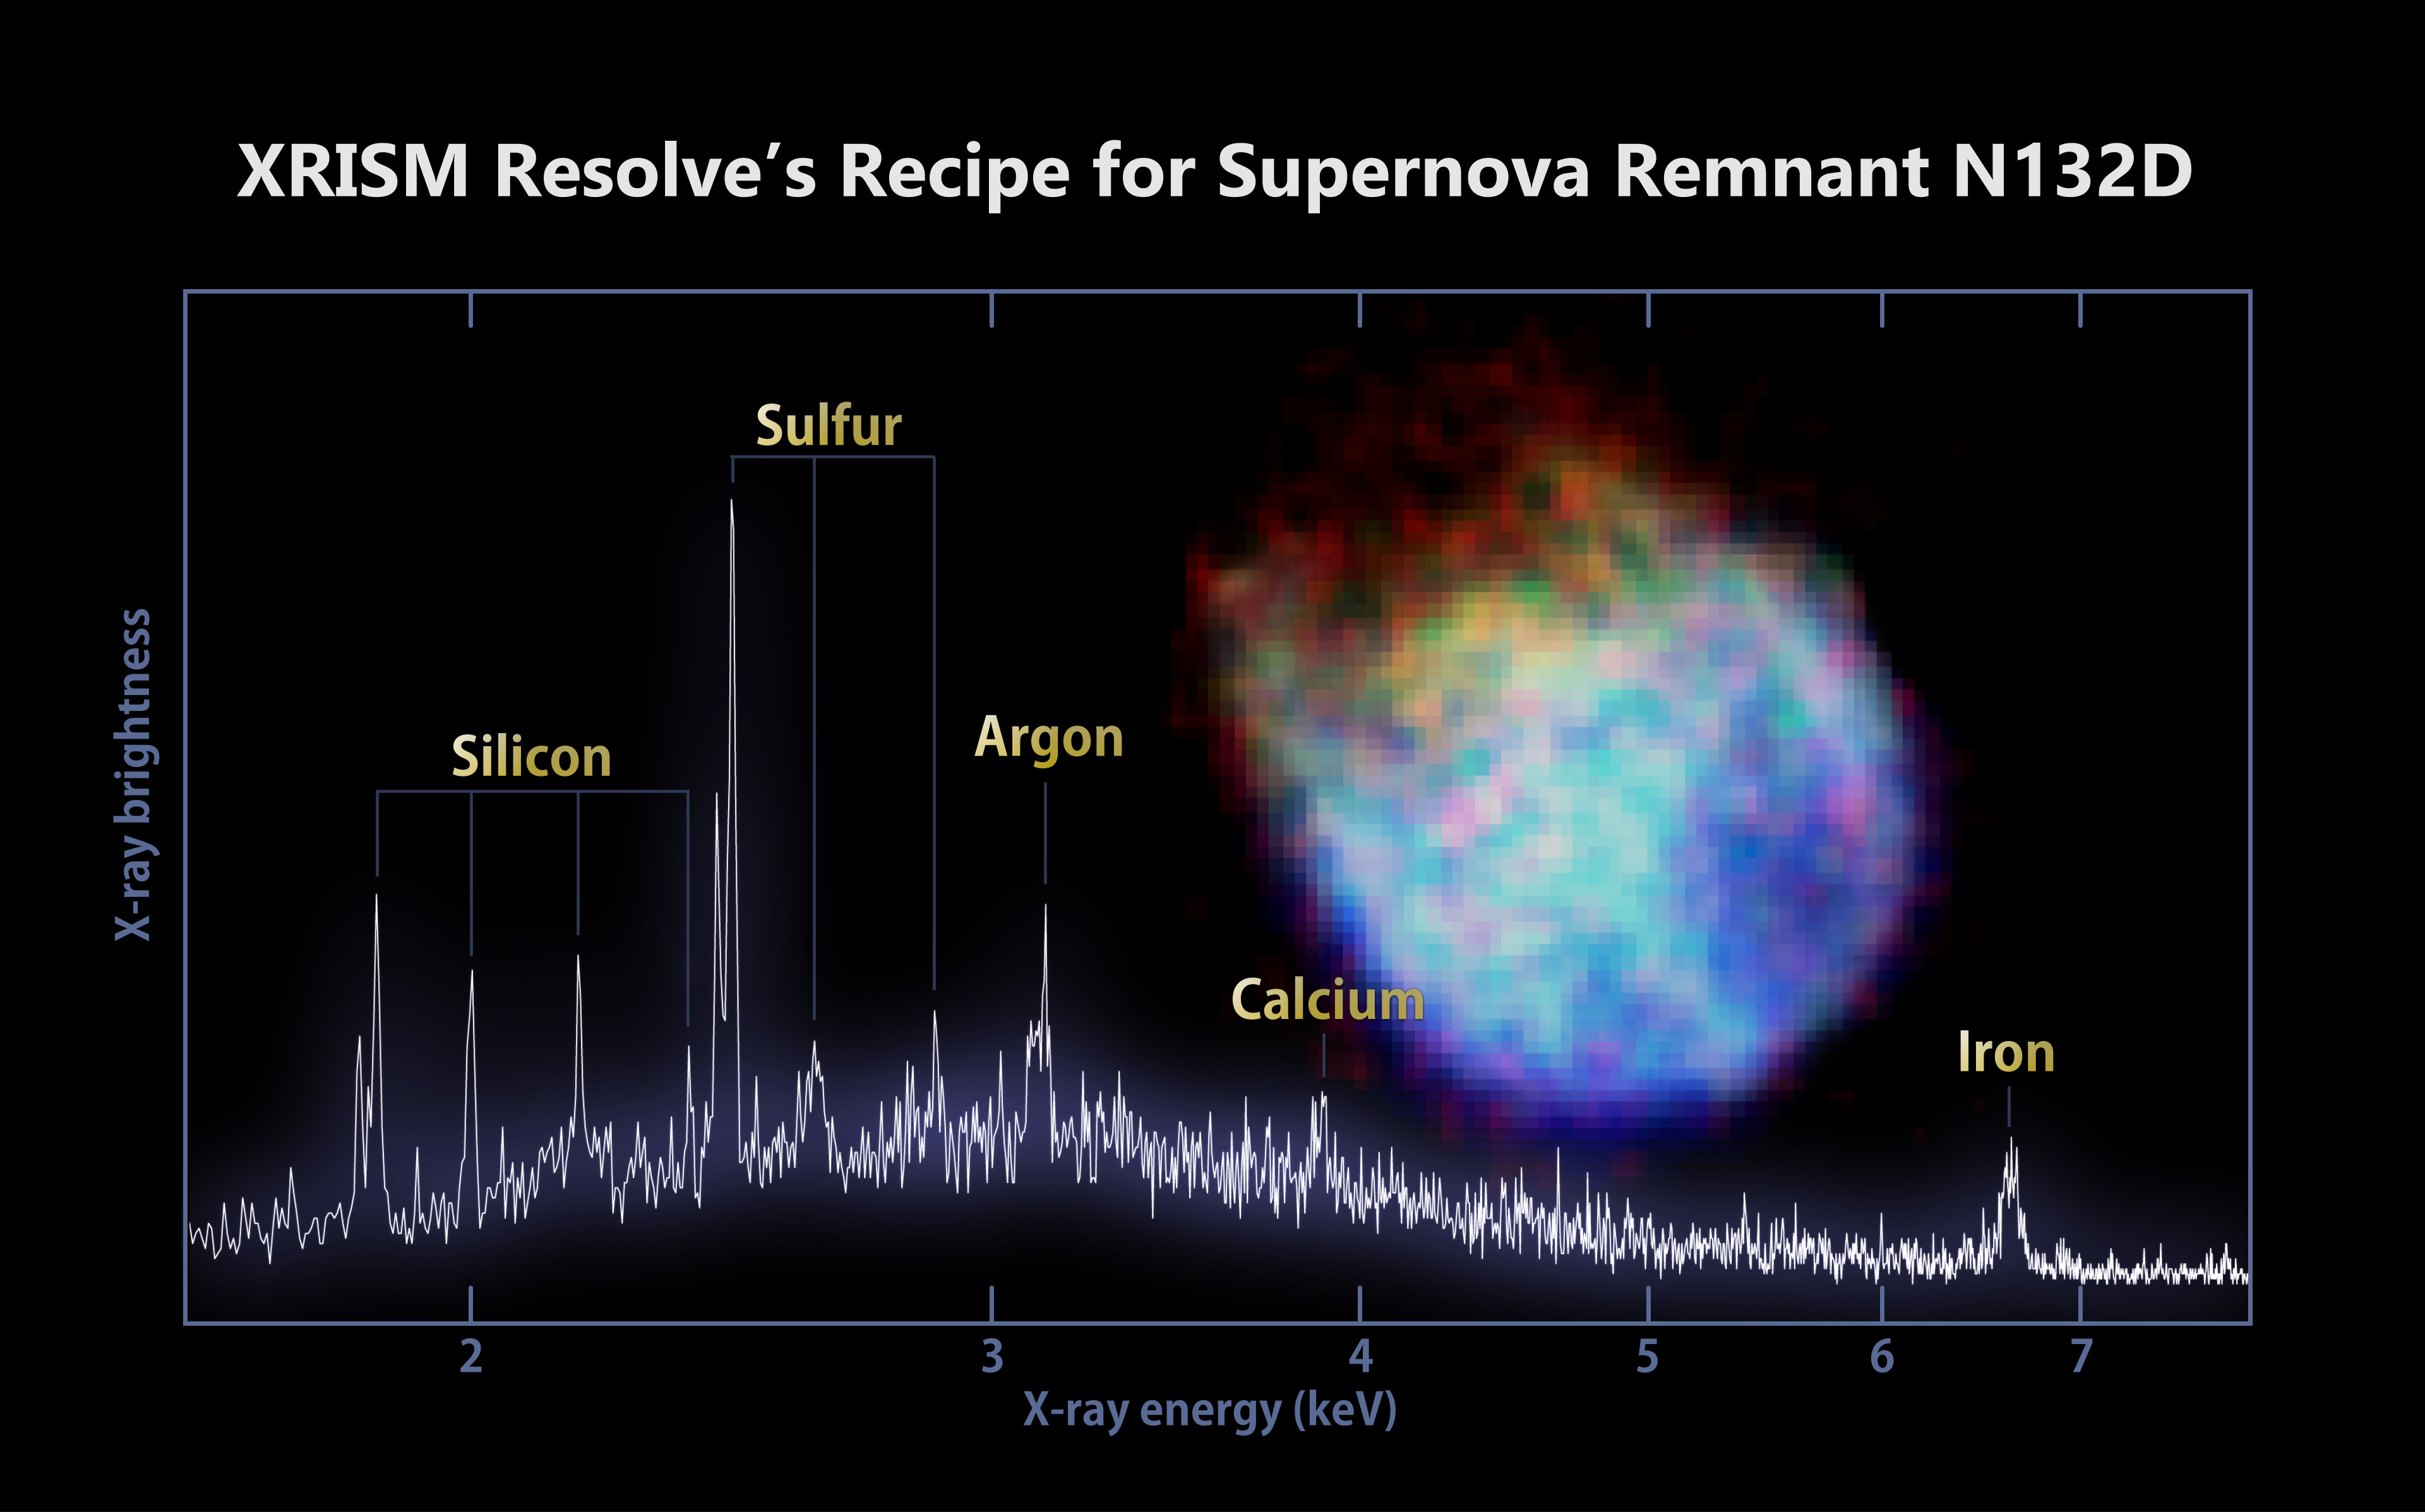 This graphic shows an X-ray image and spectrum of supernova remnant N132D.